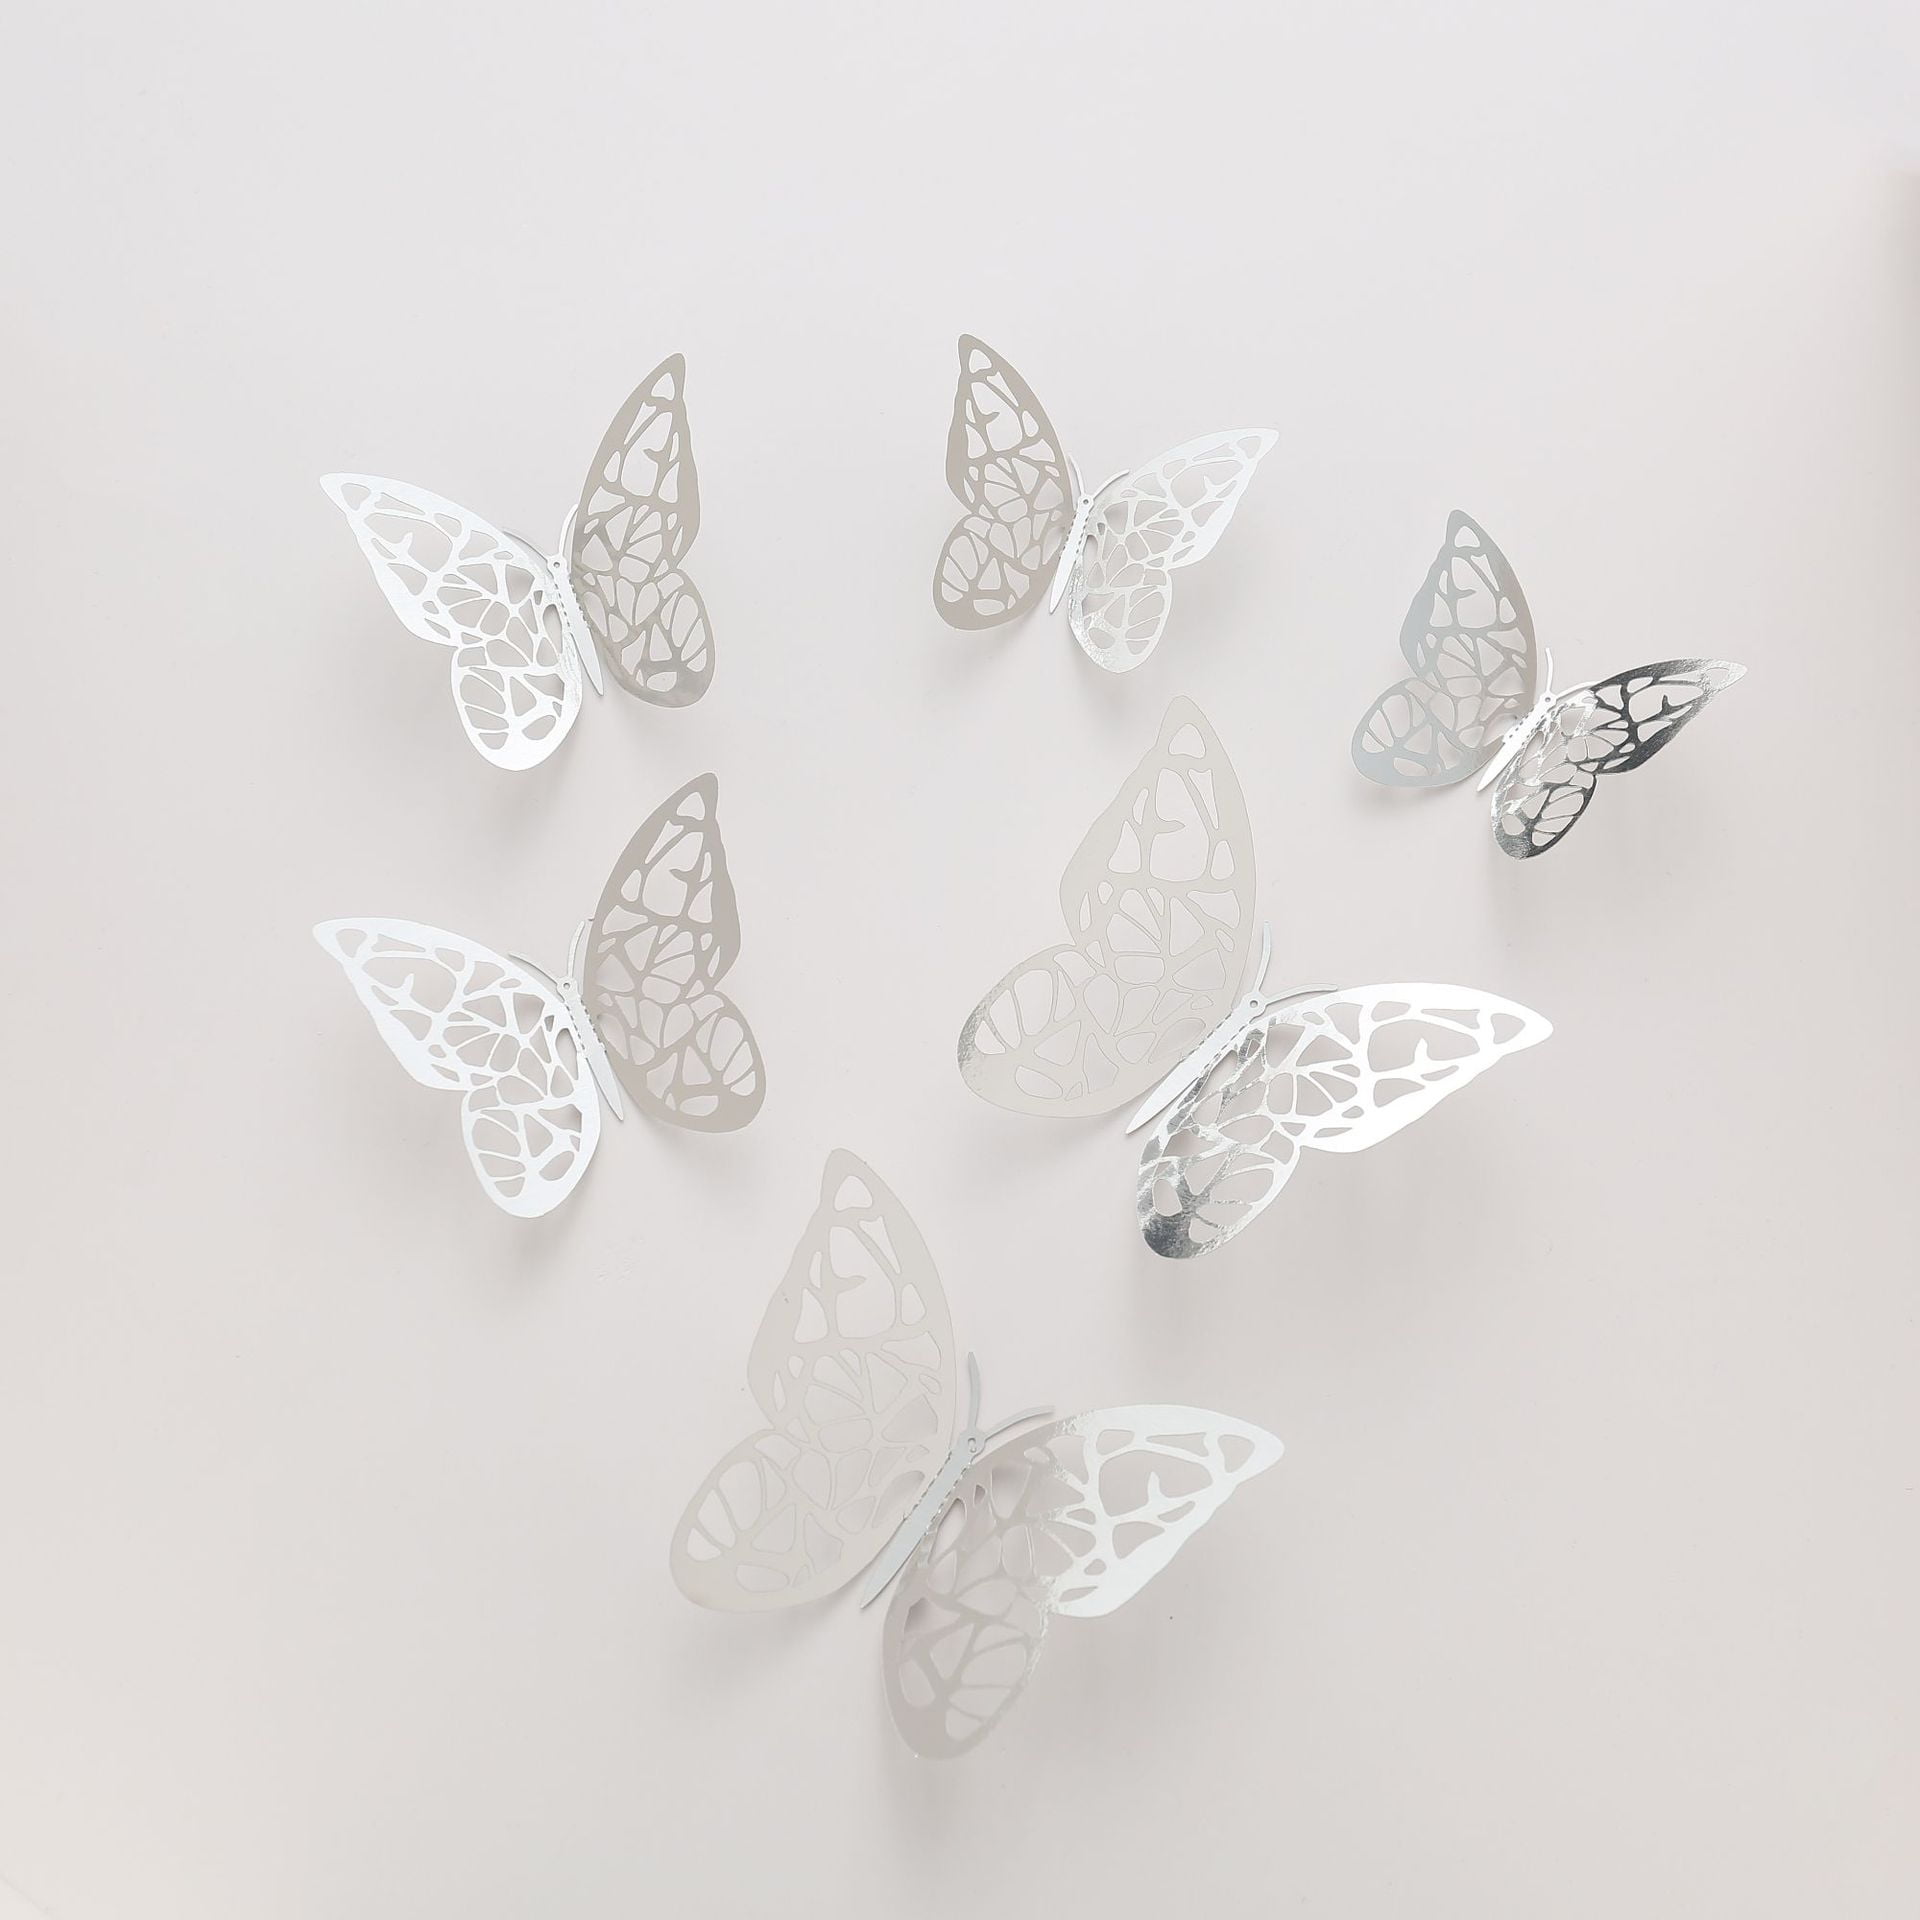 72Pcs 3D Butterfly Wall Decor Room Decor Butterfly Party Birthday Cake Decorations Black Butterfly Decorations 3 Styles 3 Sizes 3D Paper Butterflies Wall Stickers Decals for Girls Kids Bedroom 